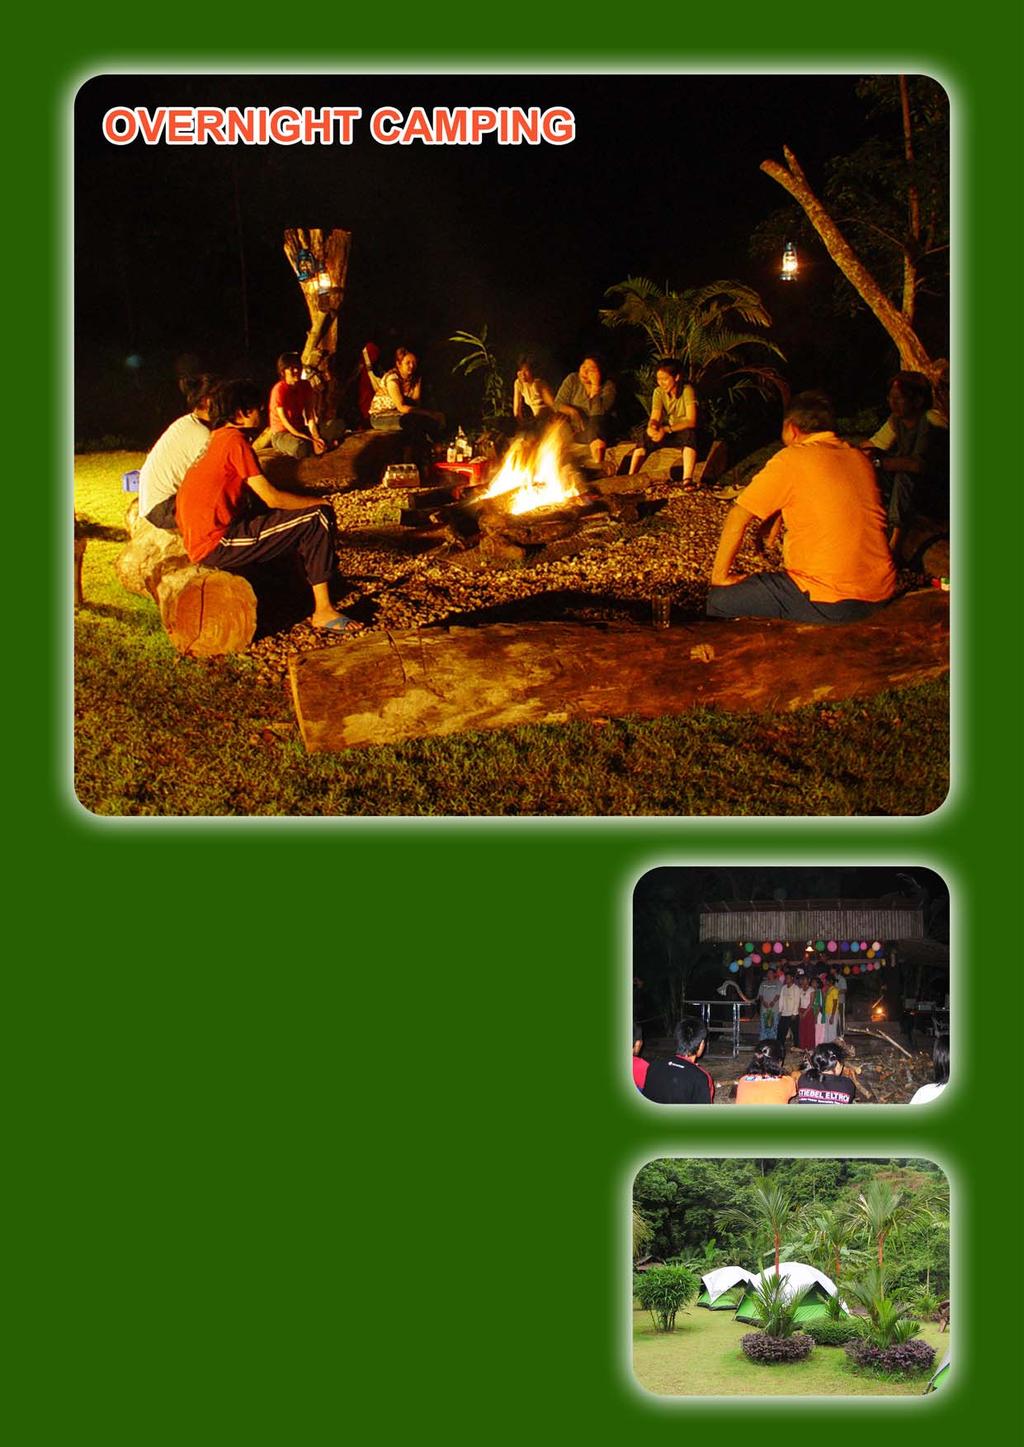 Overnight Camping Tour Code (SLC 08) This is recommended for those who seek for one peaceful night among the nature.